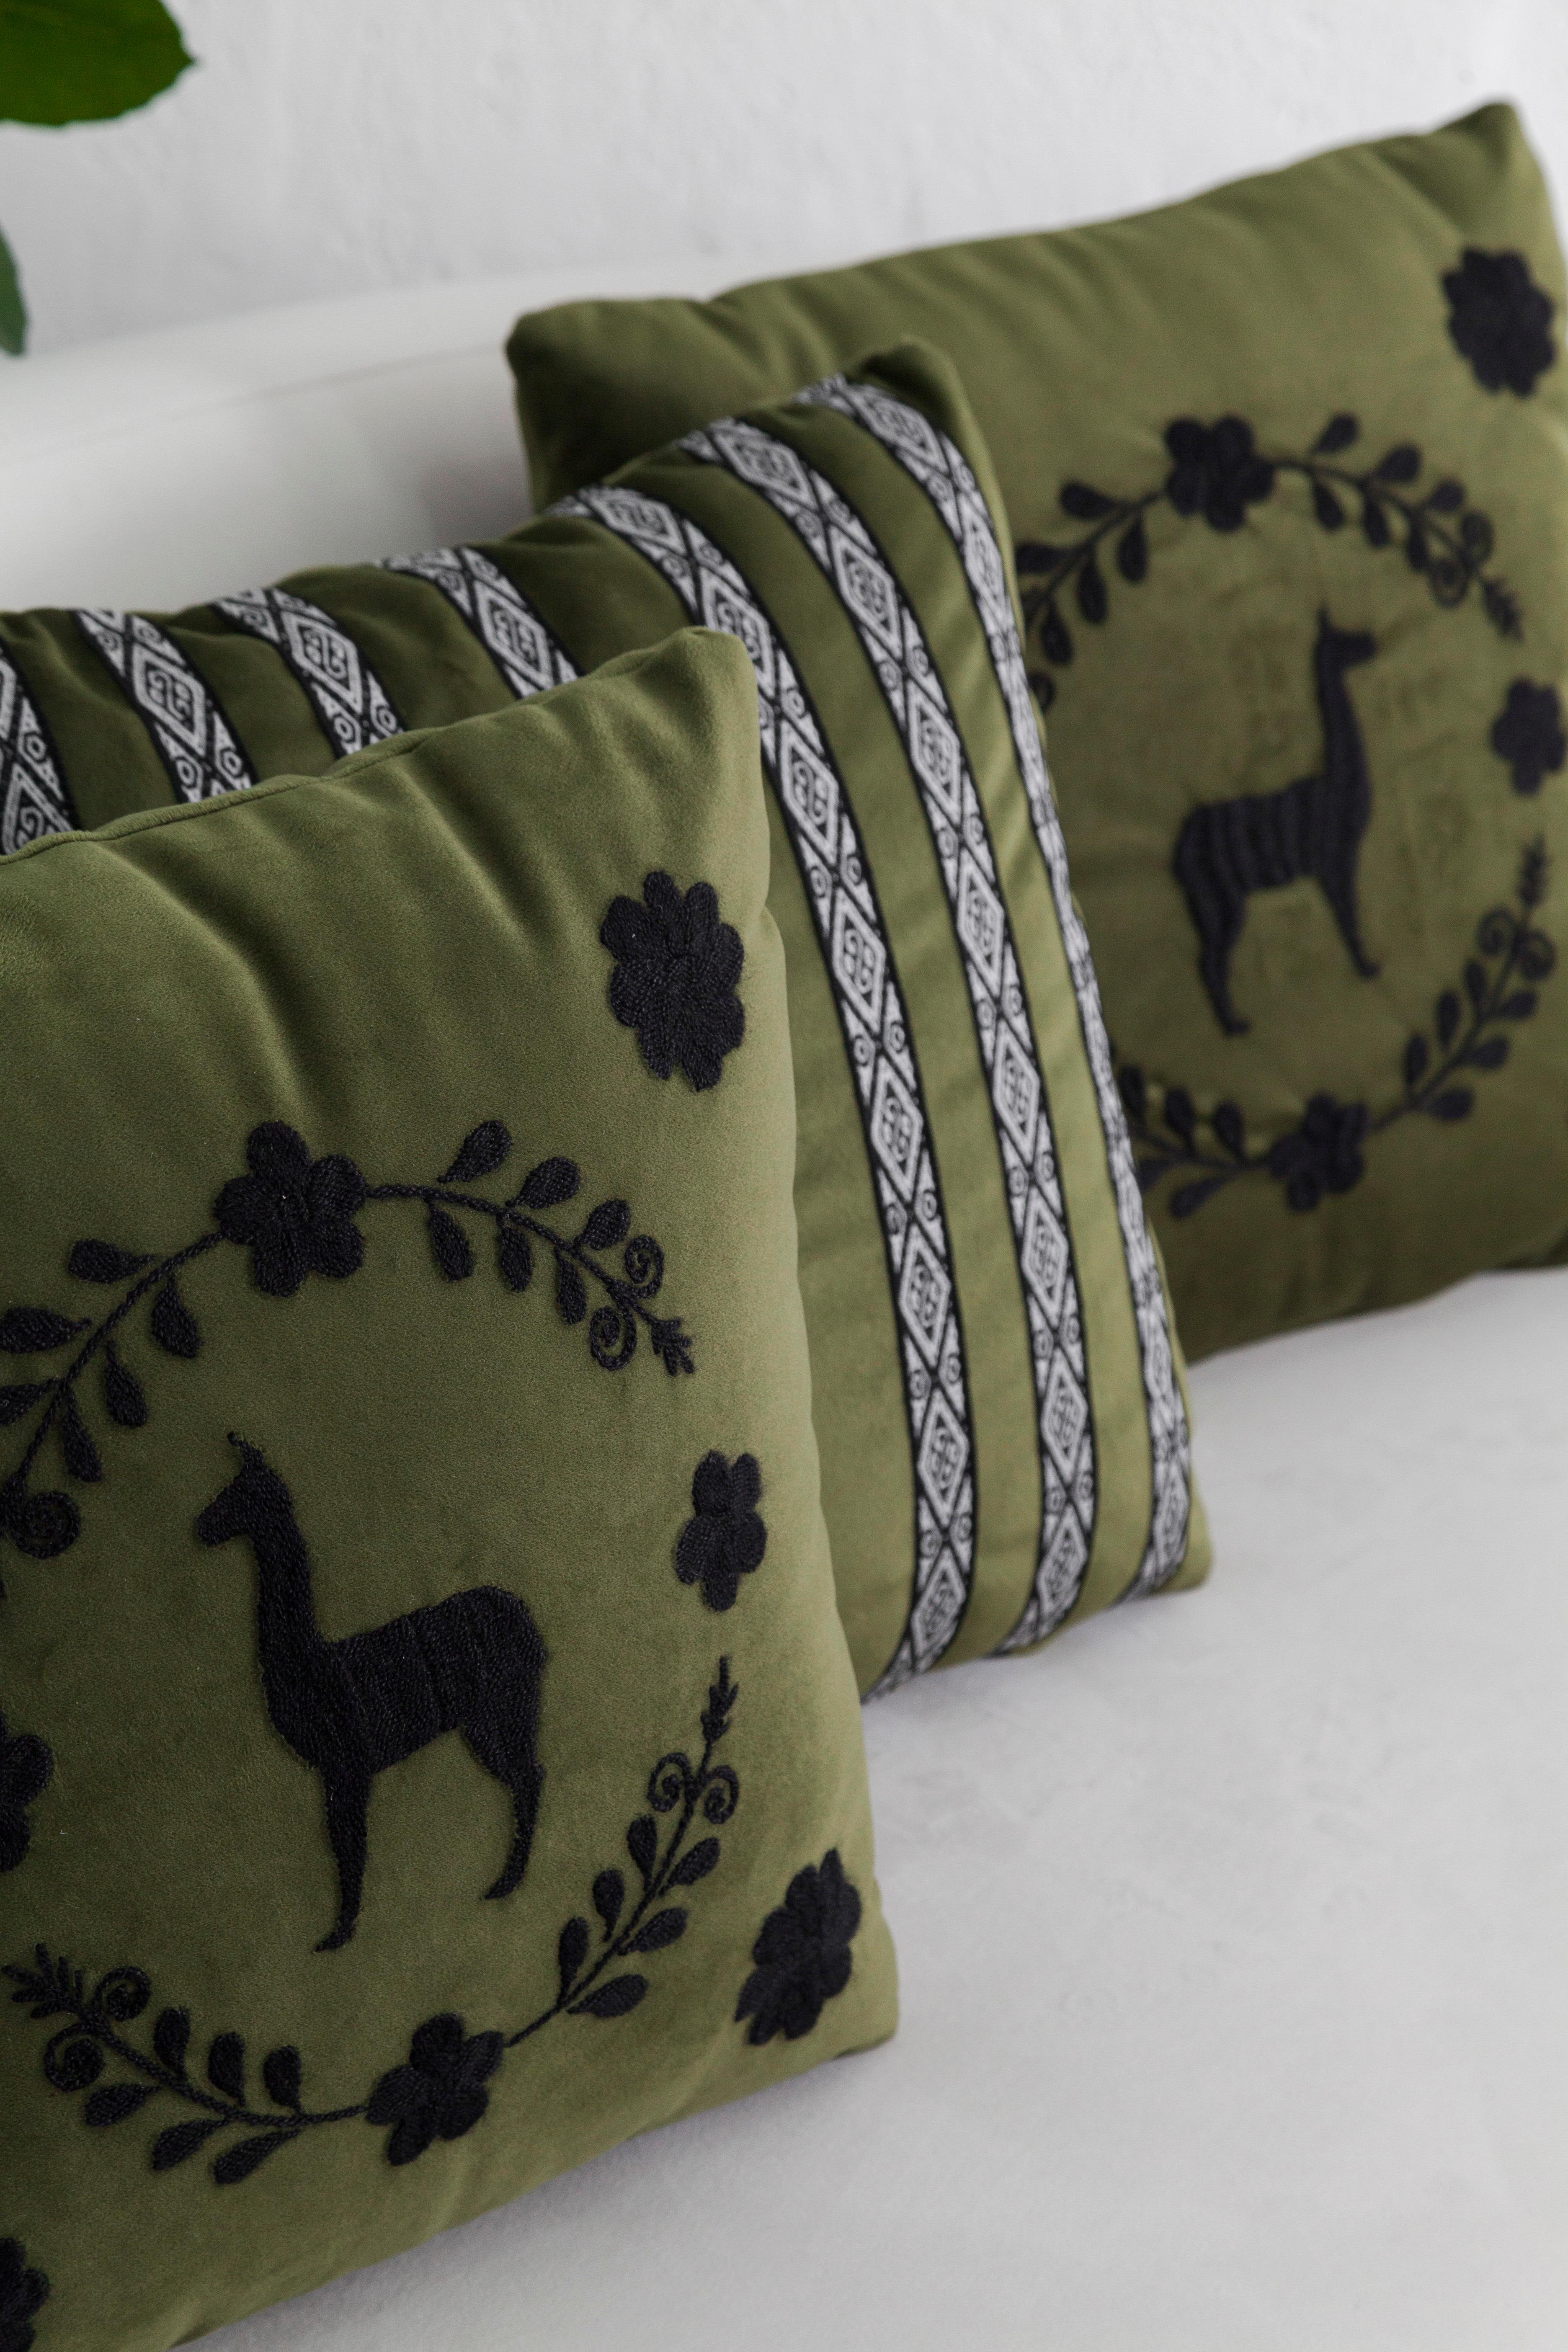 FAJAS Handwoven Artisanal Sash Pillows in Olive Green Velvet by ANDEAN, Set of 2 In New Condition For Sale In Quito, EC